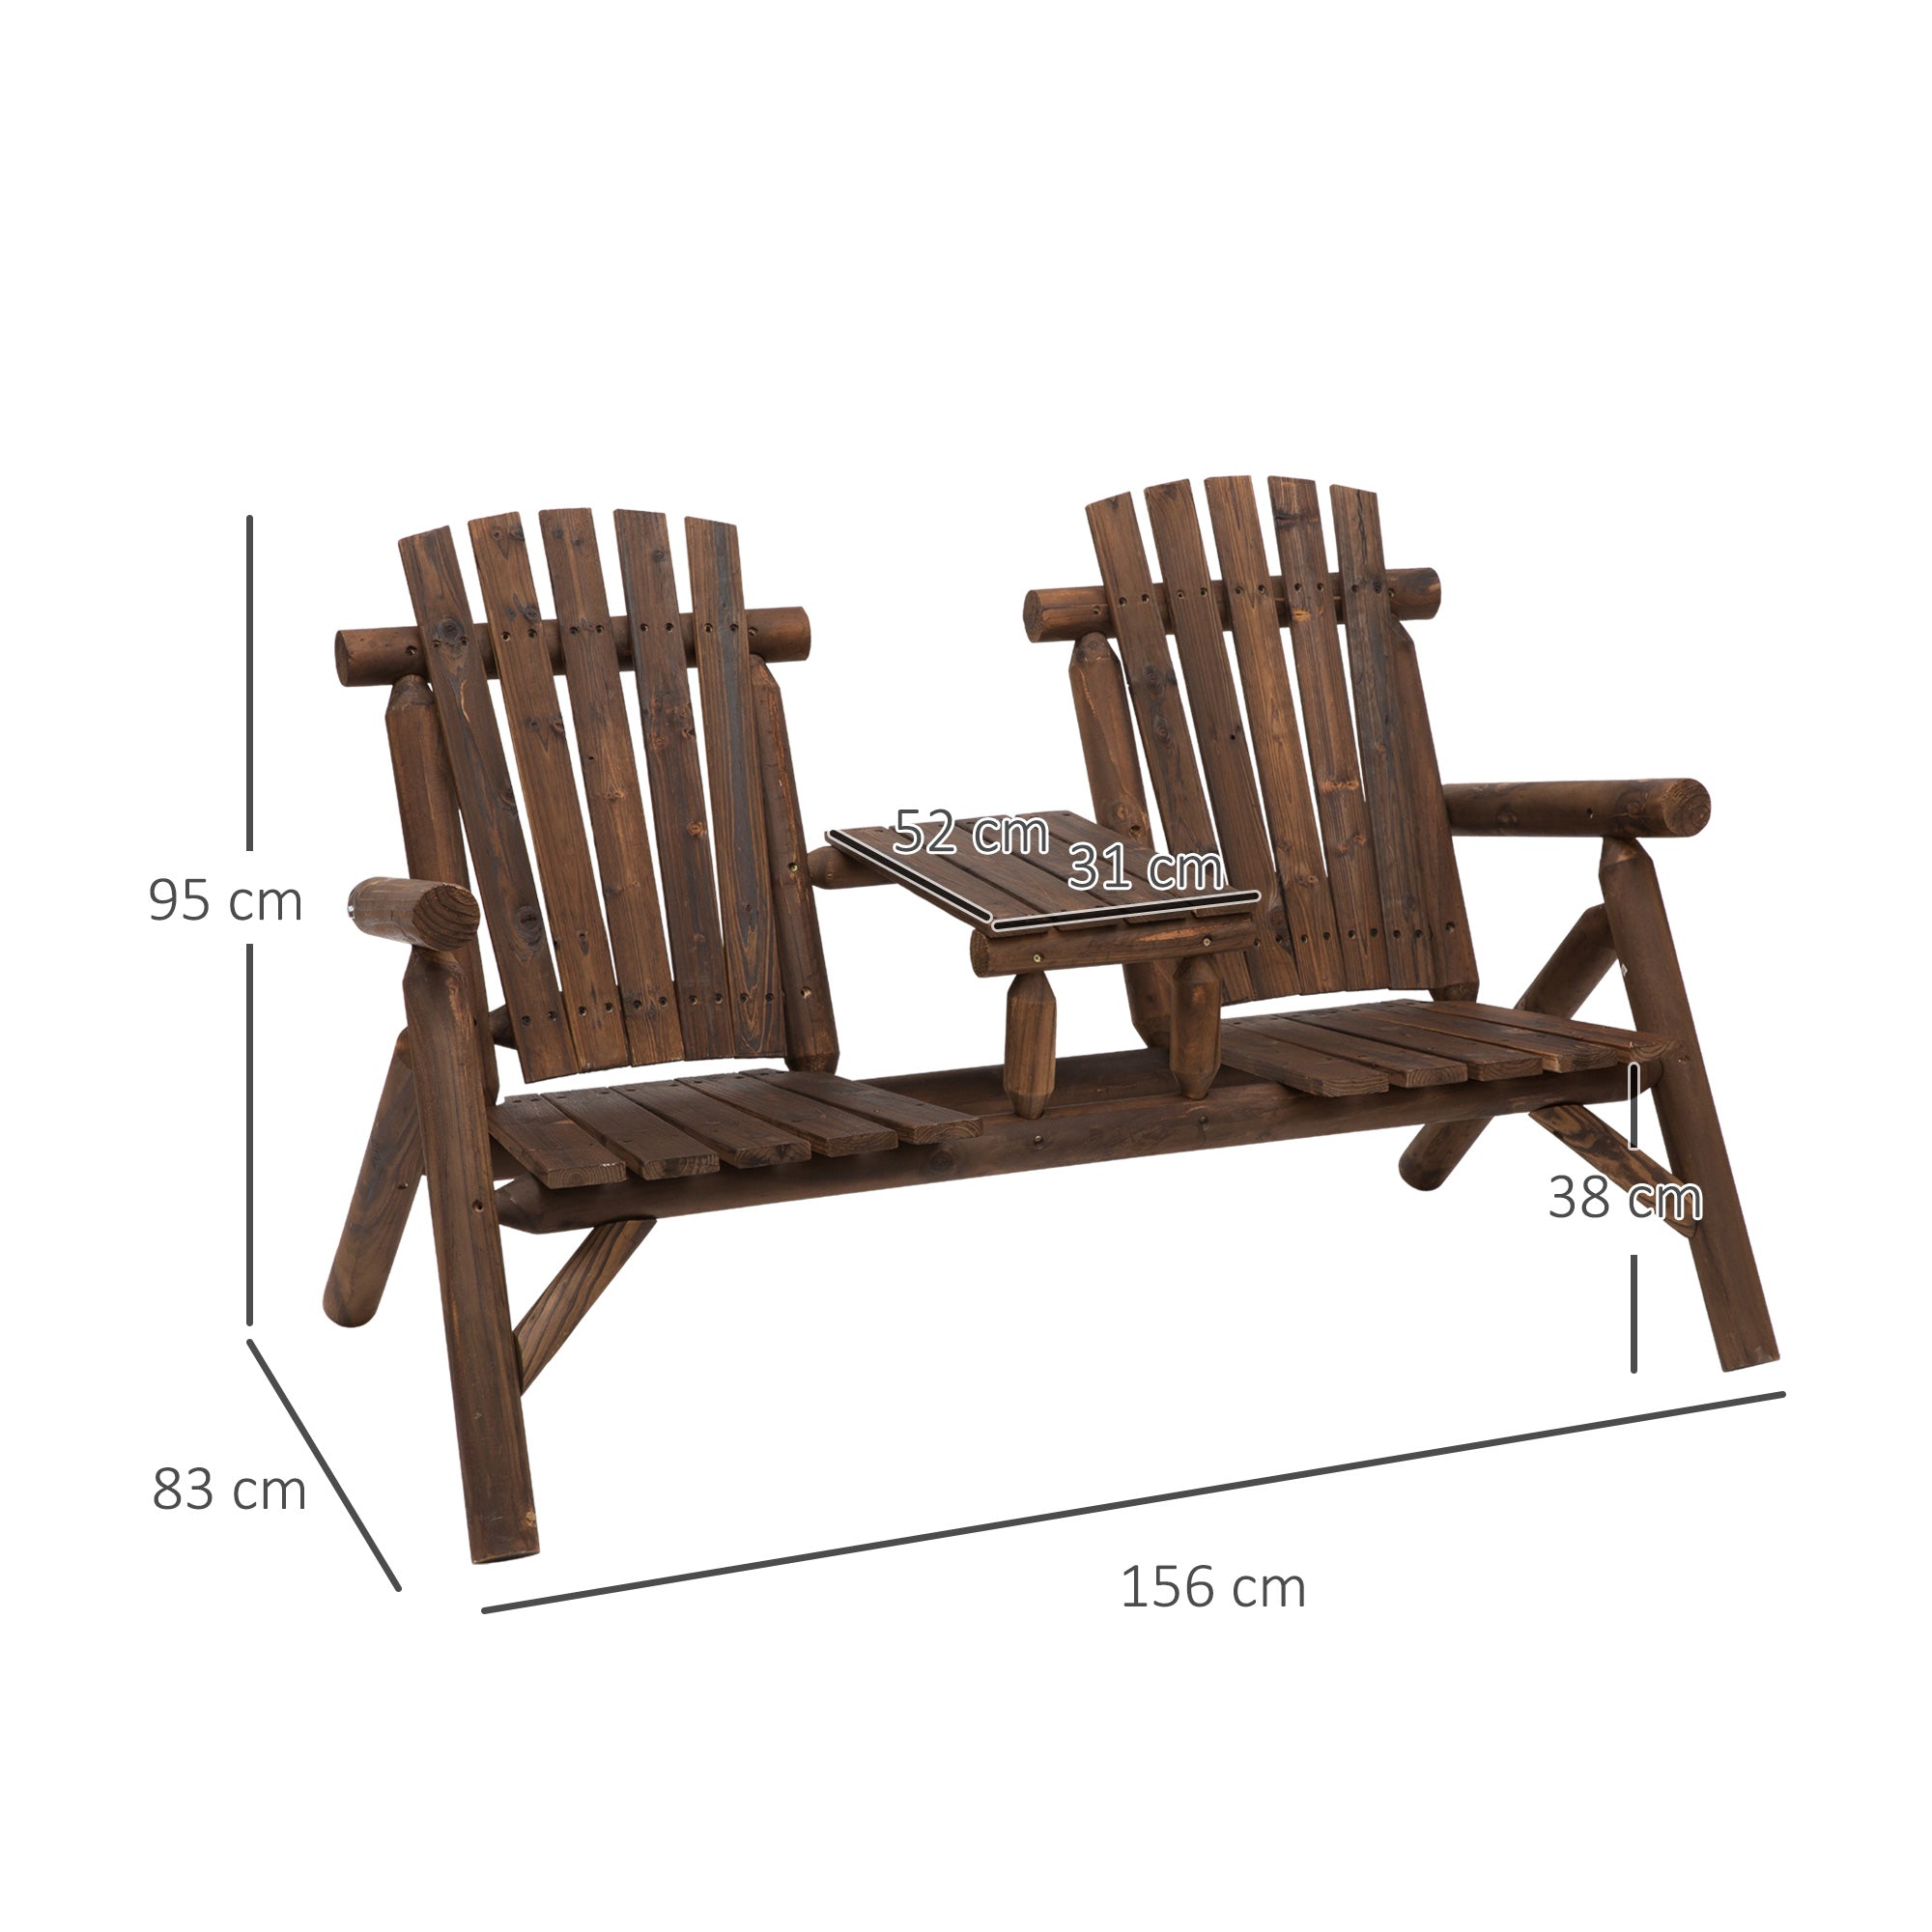 Wood Patio Chair Bench 2 Seats with Center Coffee Table, Garden Loveseat Bench Backyard, Perfect for Lounging Relaxing Outdoors, Carbonized-2